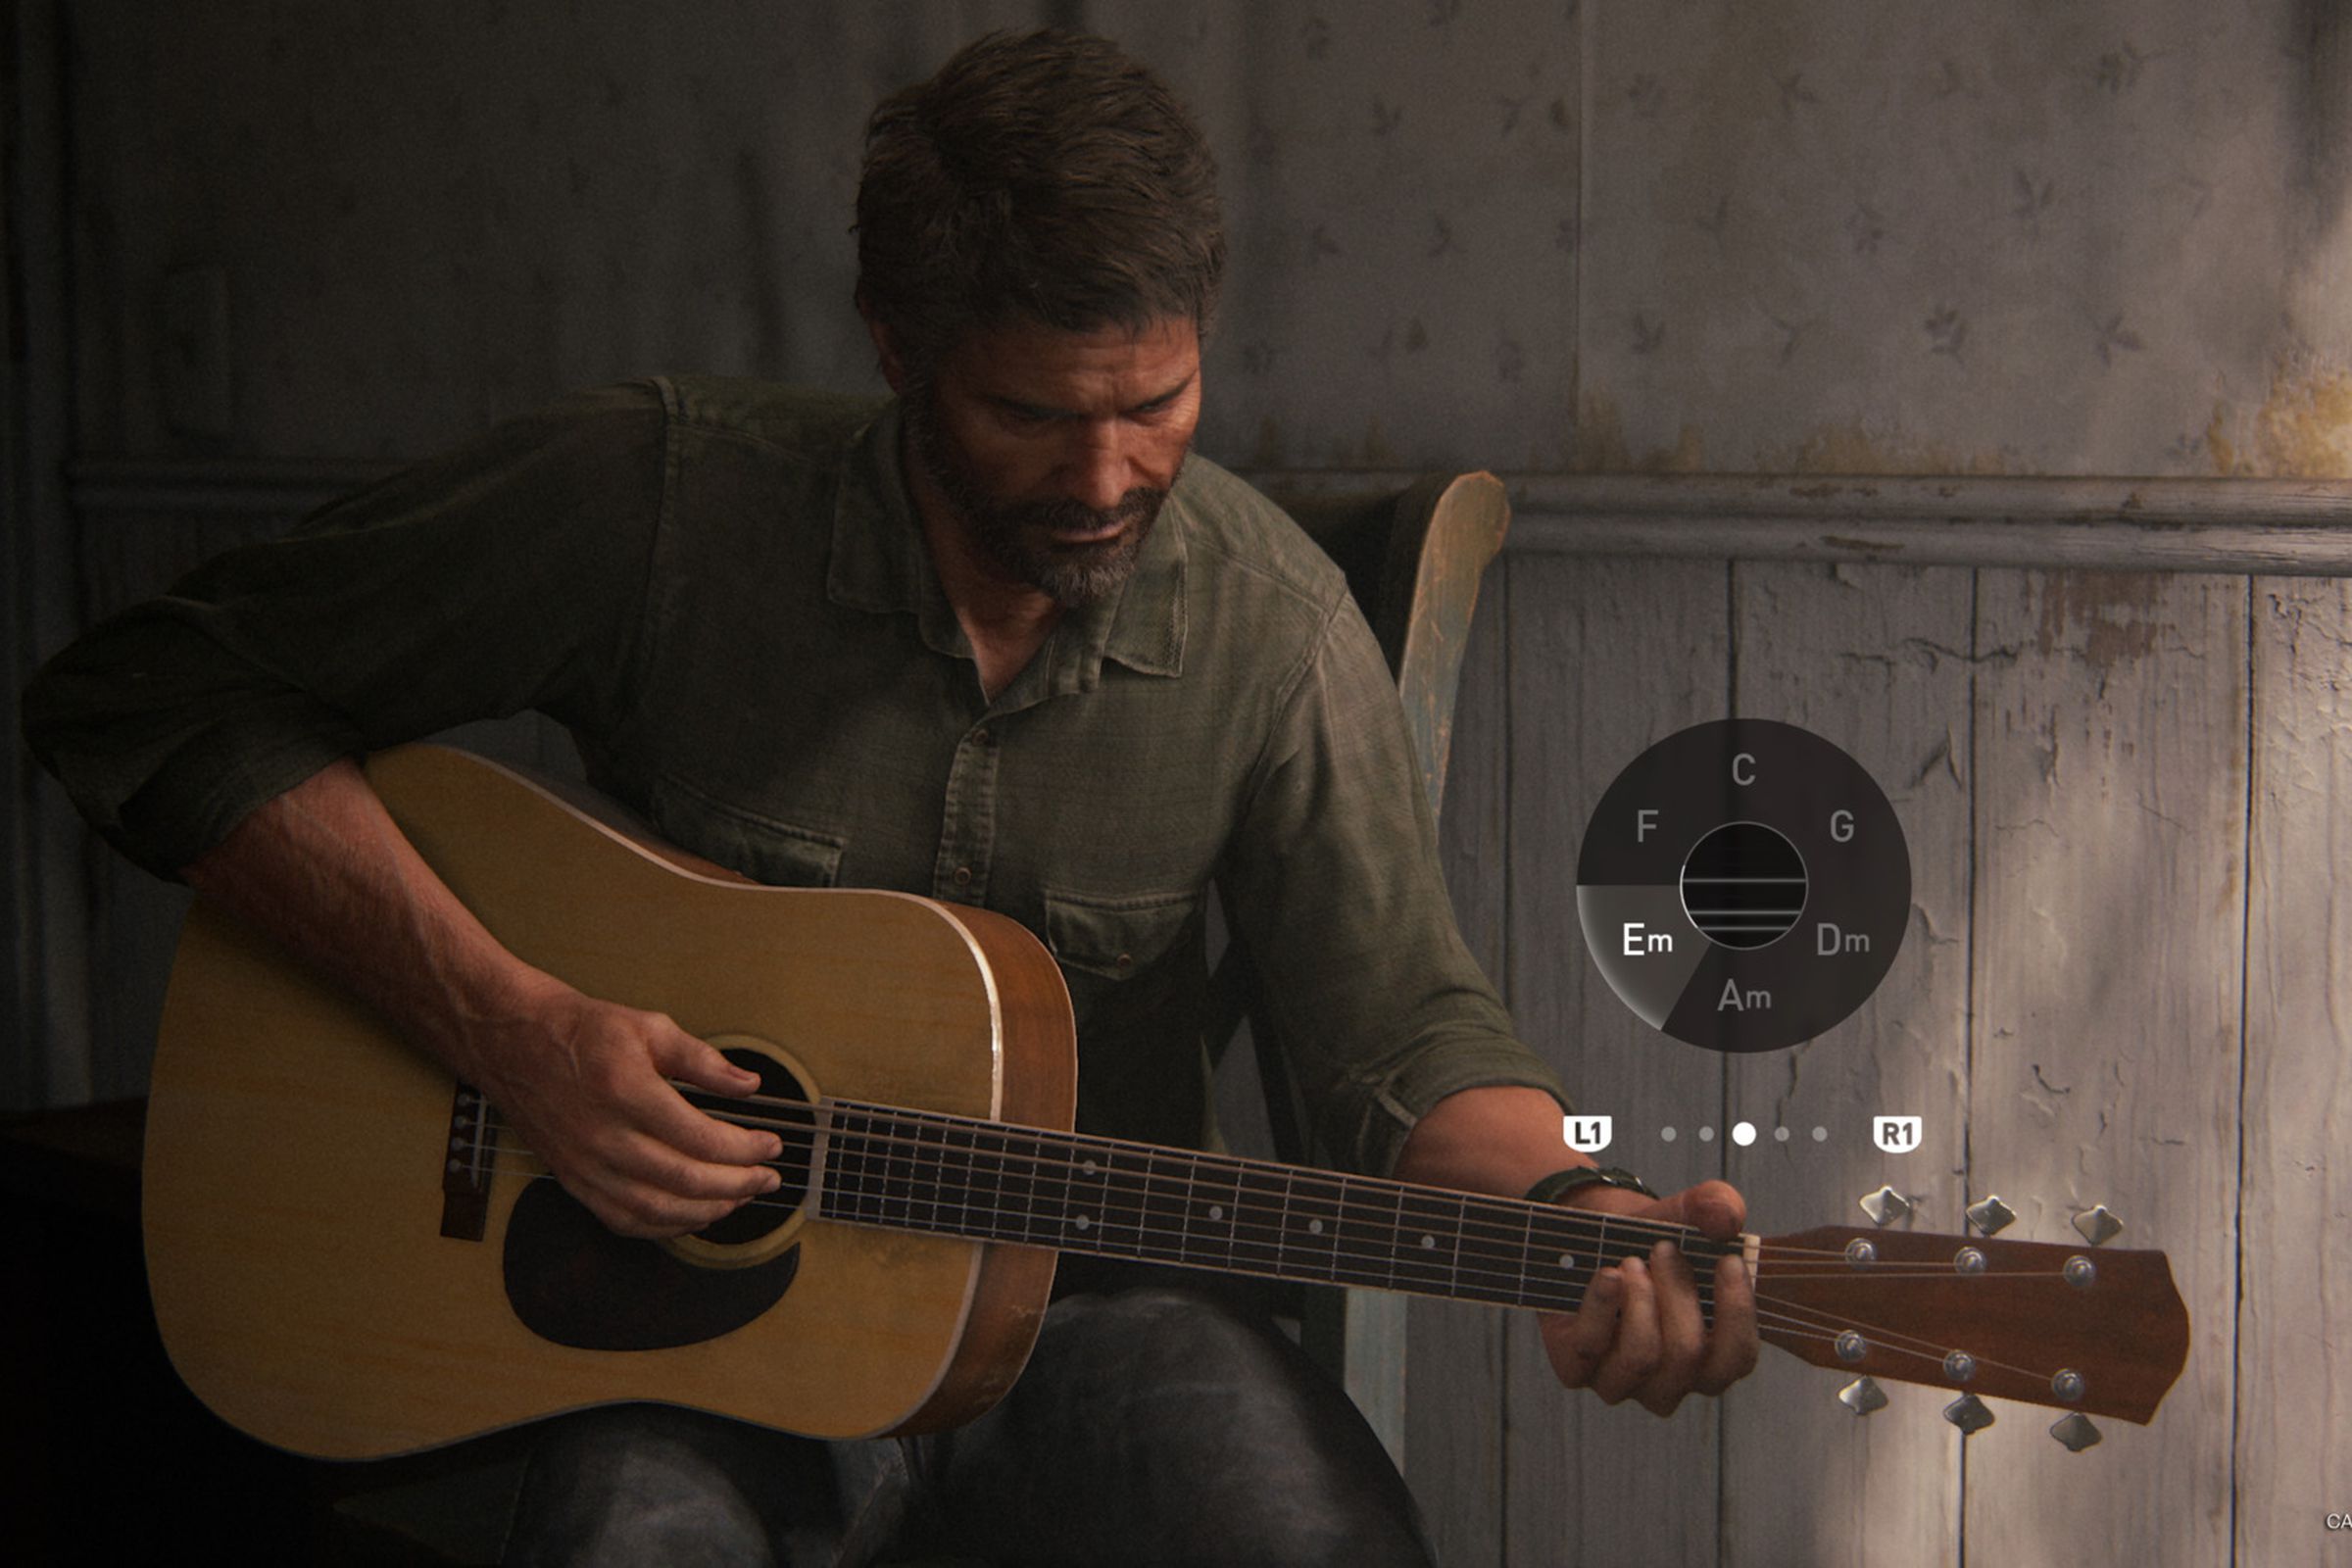 A screenshot of Joel playing the guitar in The Last of Us Part II.